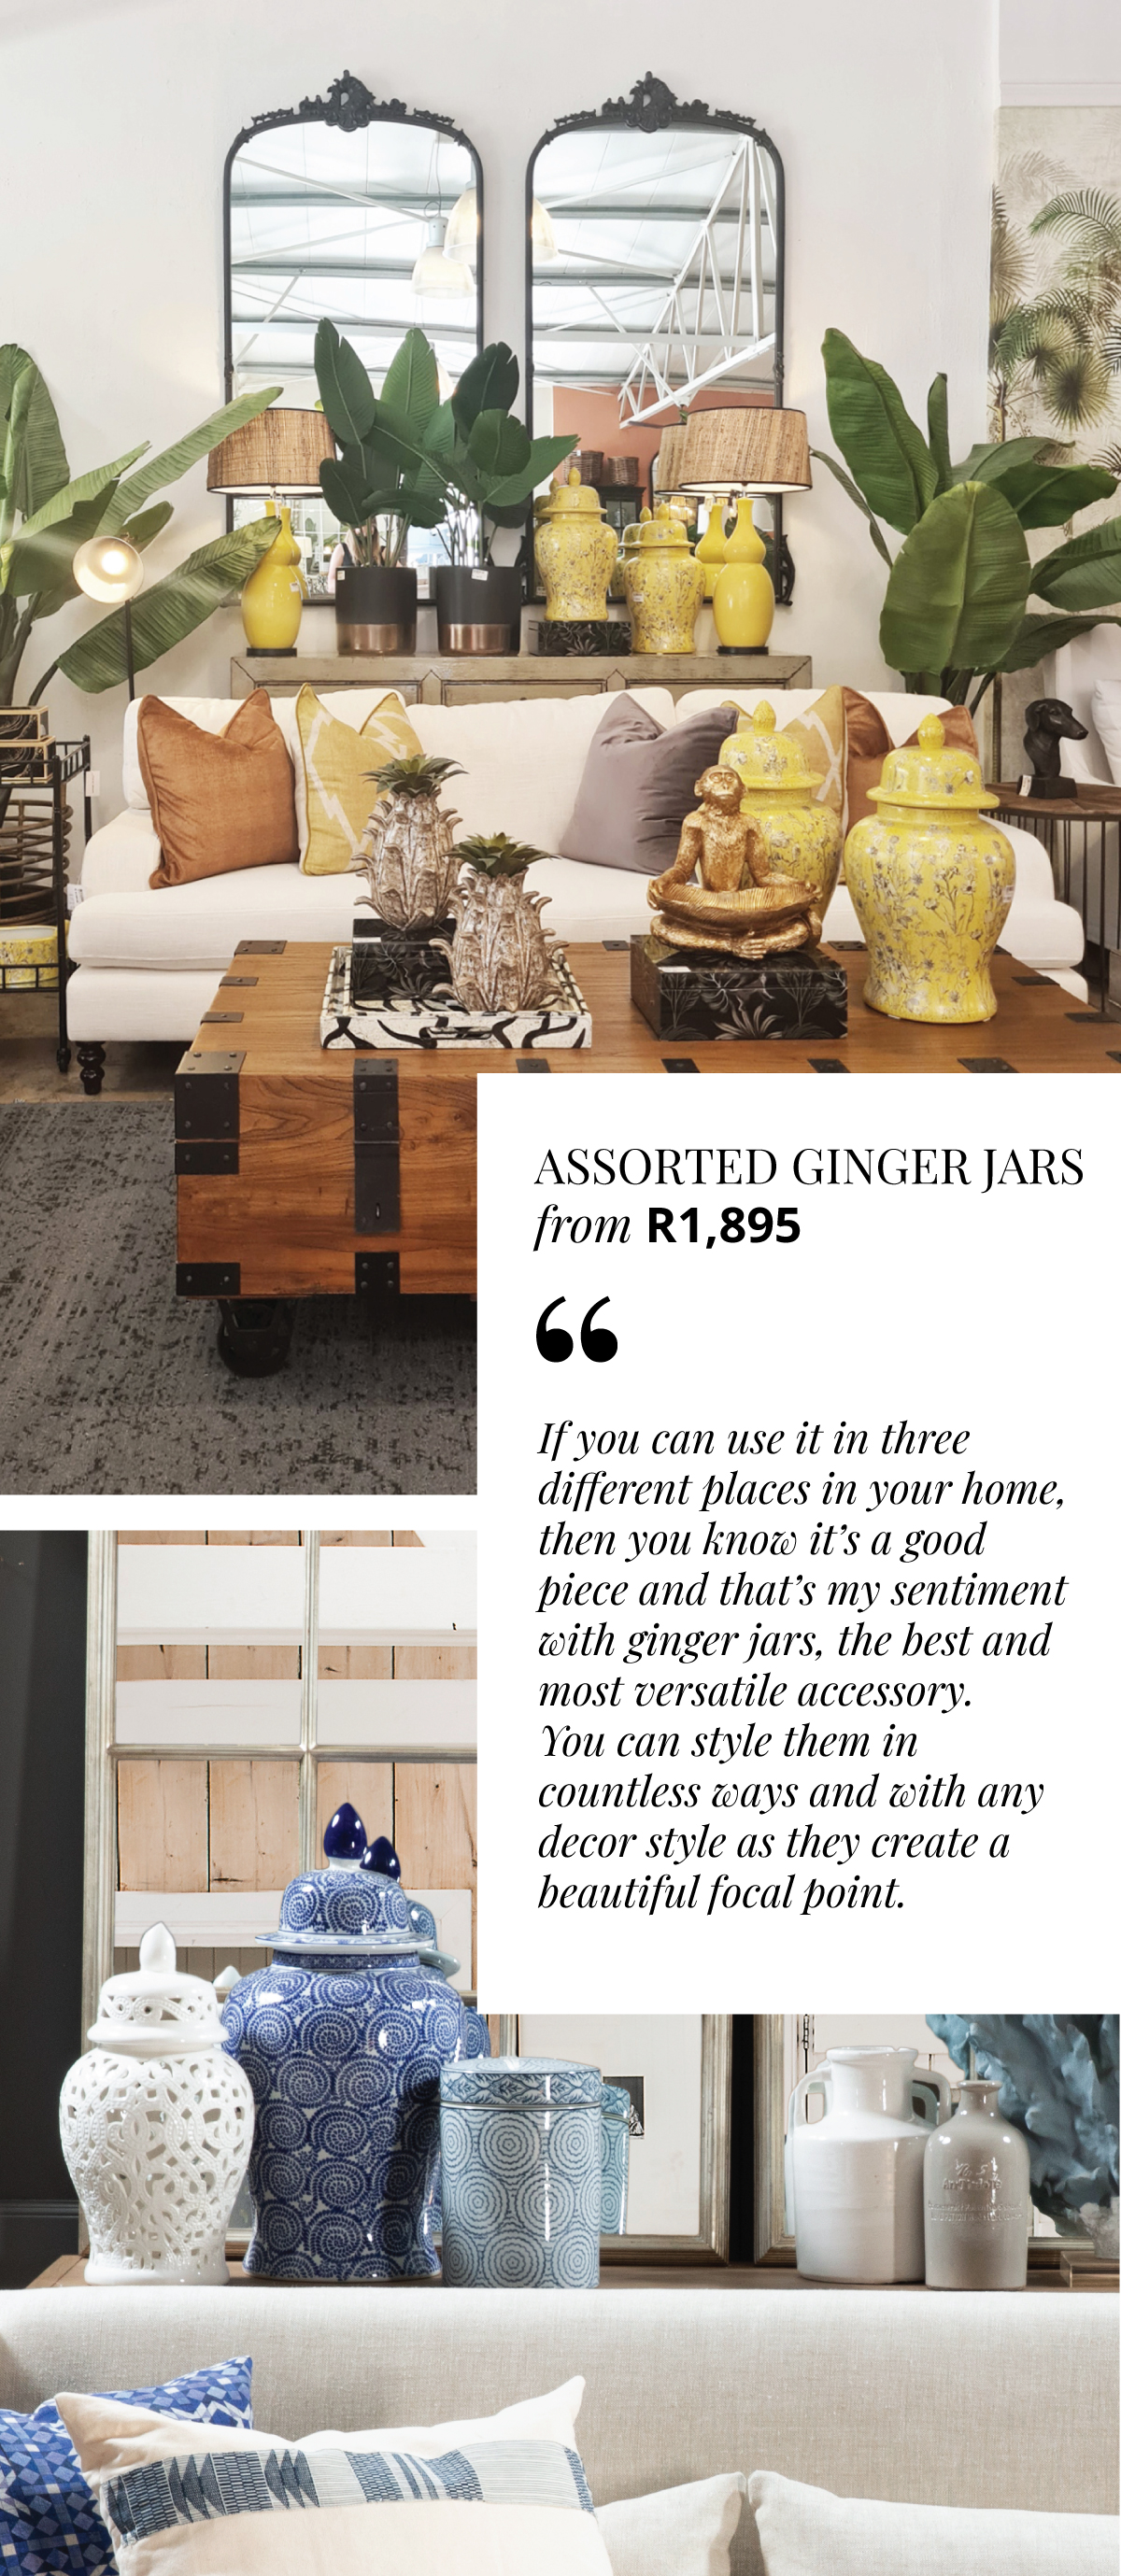 If you can use it in three different places in your home, then you know it’s a good piece and that’s my sentiment with ginger jars, the best and most versatile accessory. You can style them in countless ways and with any decor style as they create a beautiful focal point.